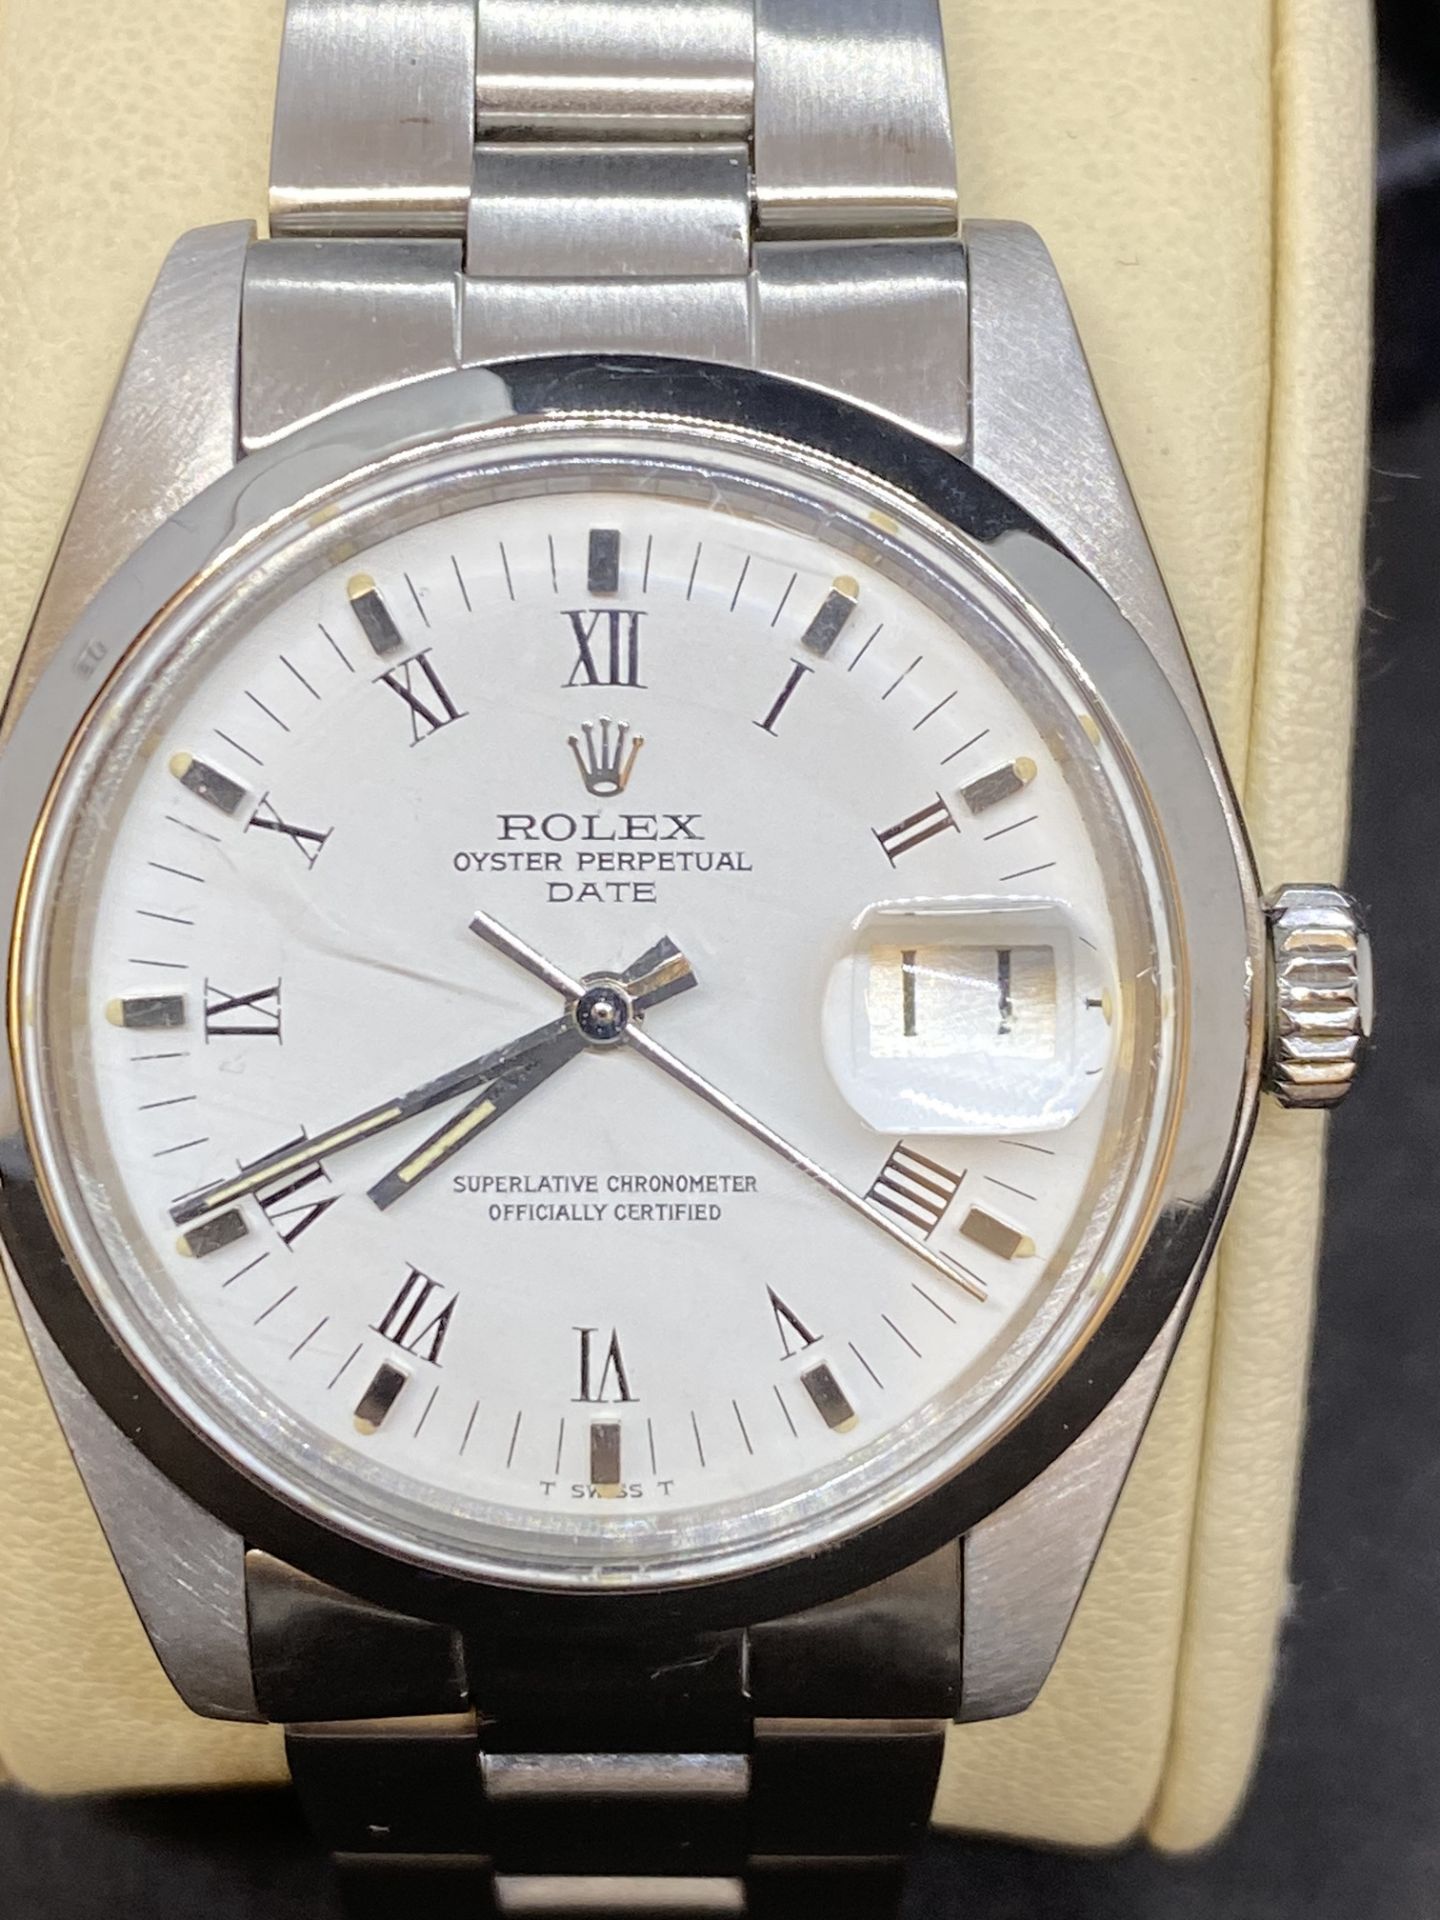 STAINLESS STEEL ROLEX OYSTER PERPETUAL DATE WATCH - Image 2 of 11